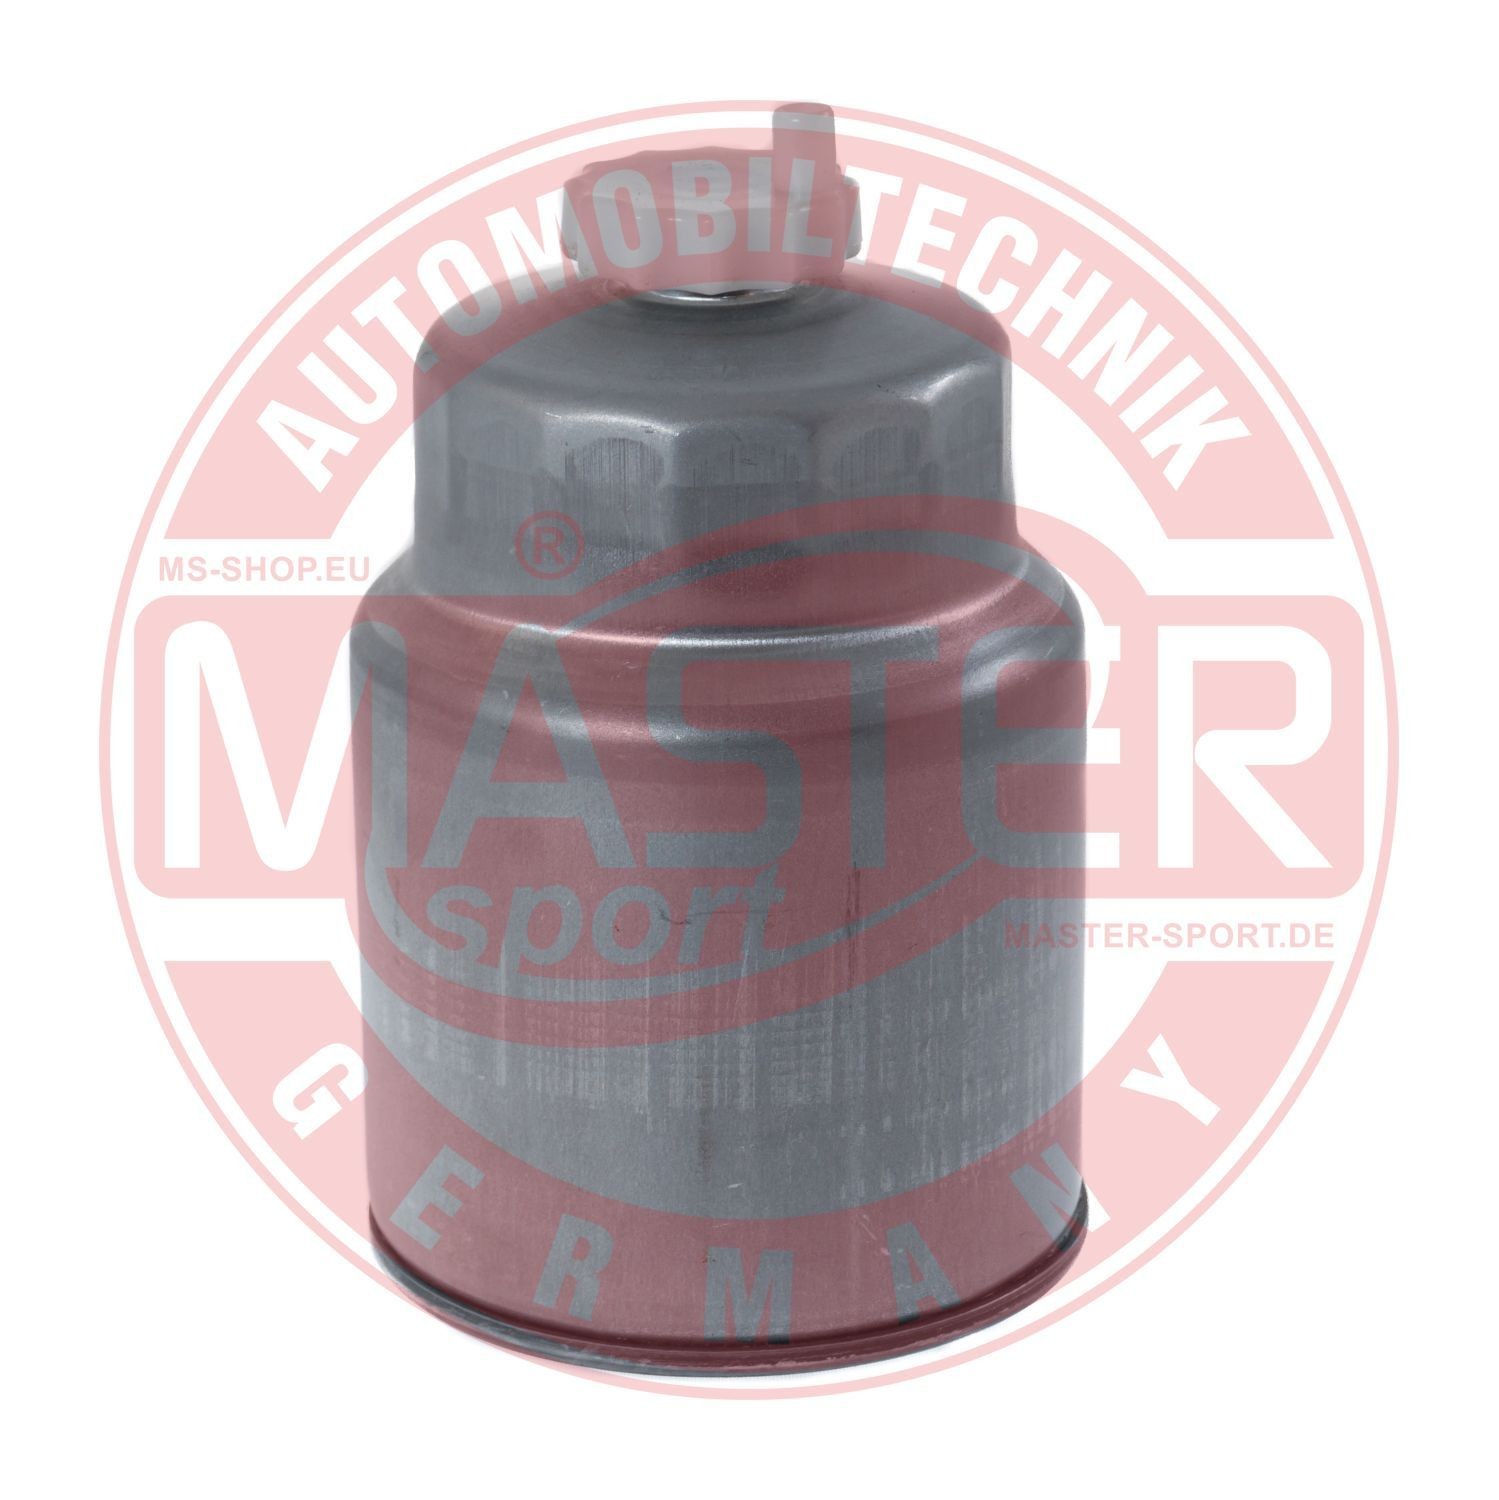 Fuel filter MASTER-SPORT 940/22-KF-PCS-MS - Nissan NP300 PICKUP Fuel injection spare parts order